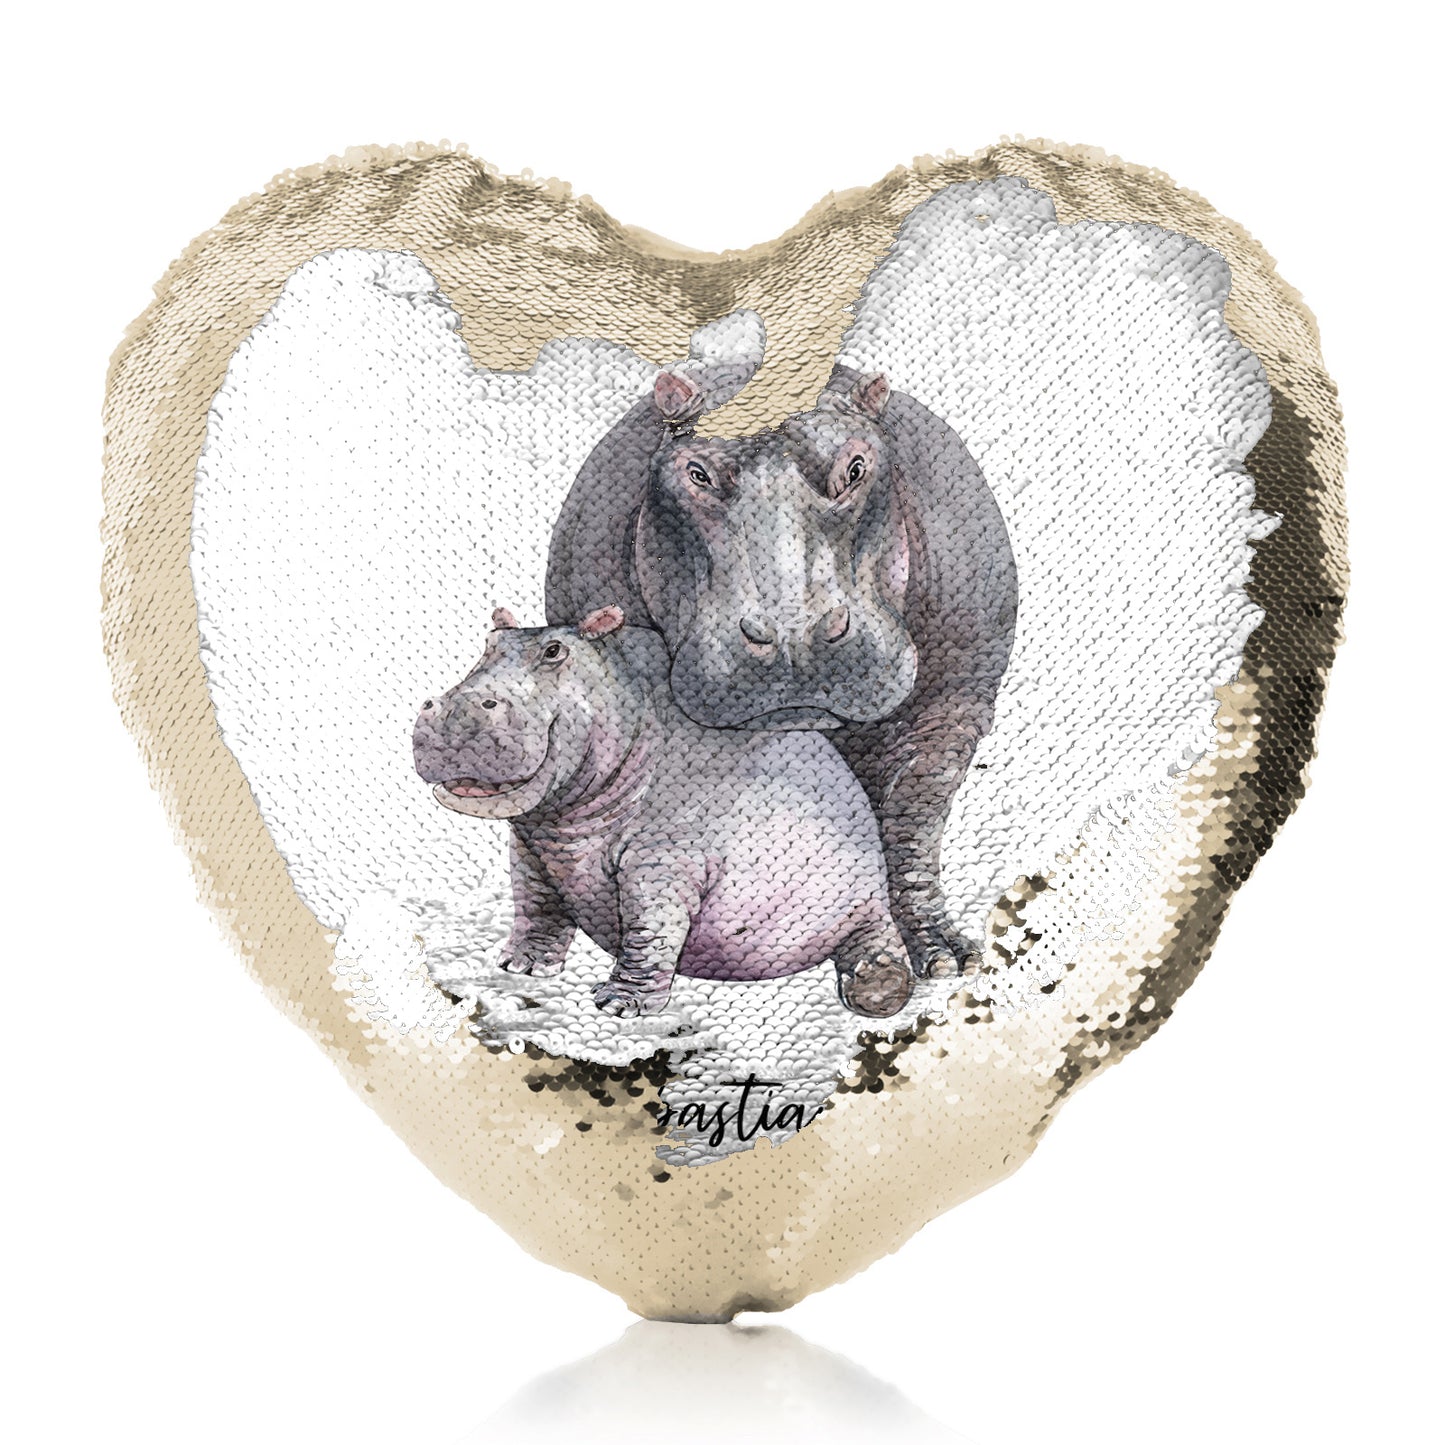 Personalised Sequin Heart Cushion with Welcoming Text and Embracing Mum and Baby Hippos